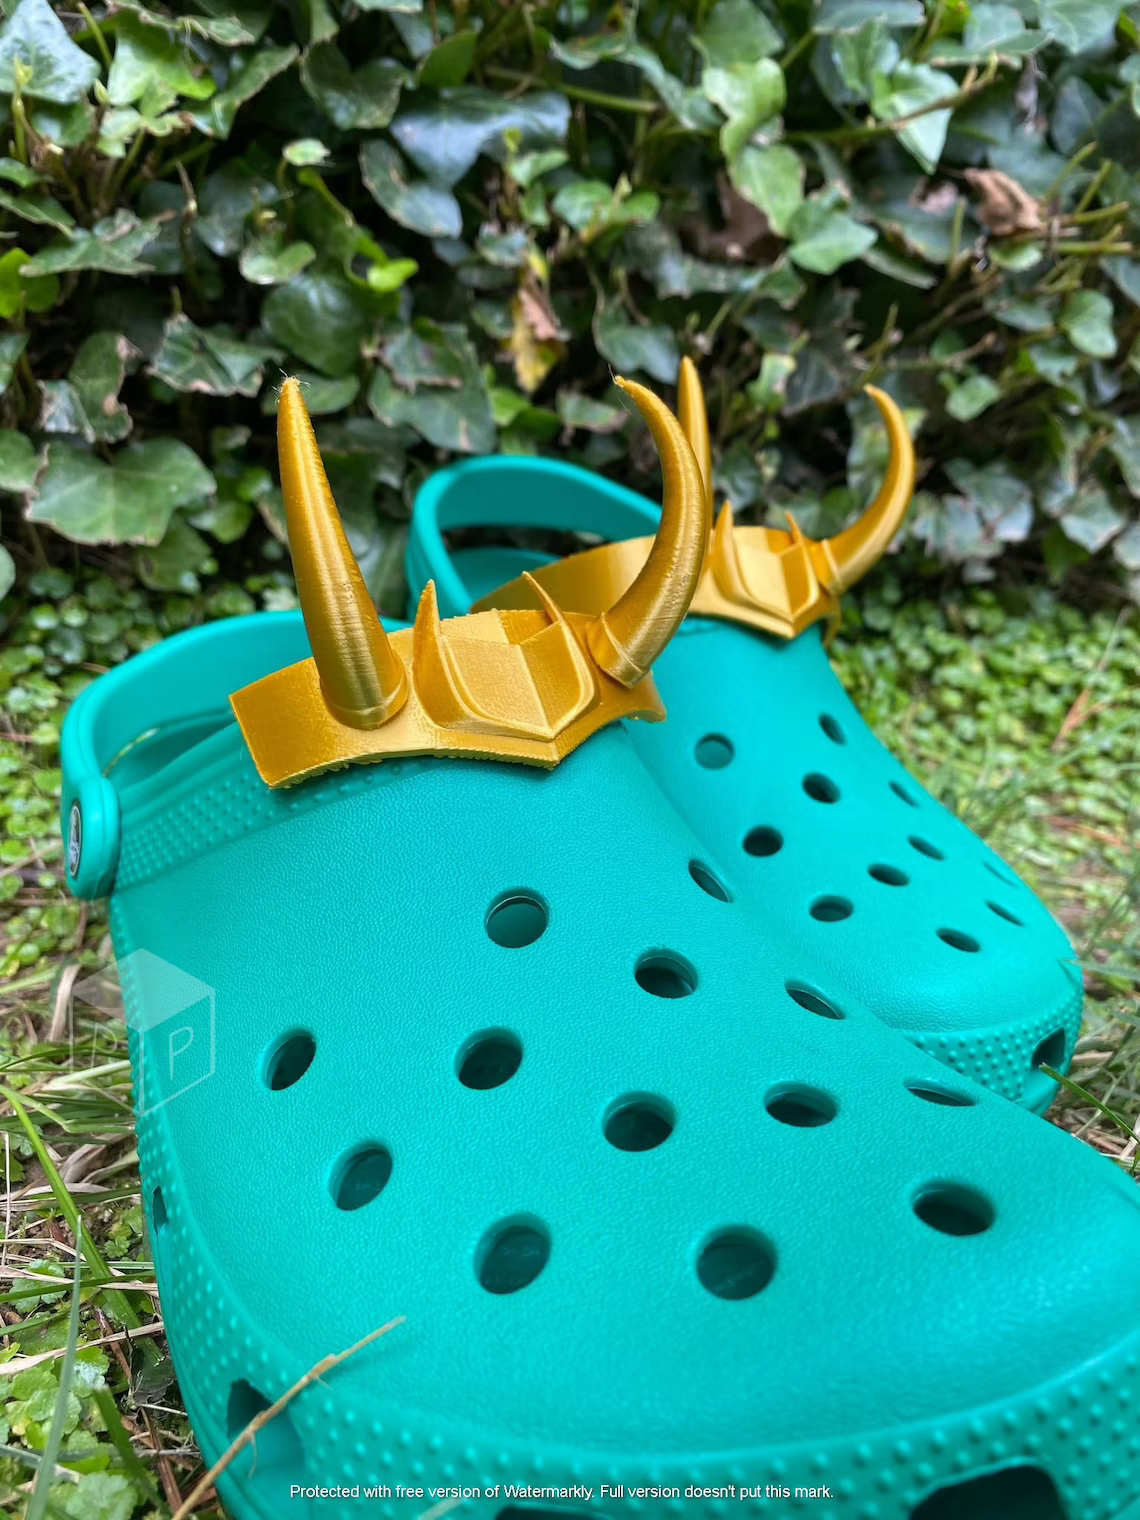 loki horns that fit on the top of crocs